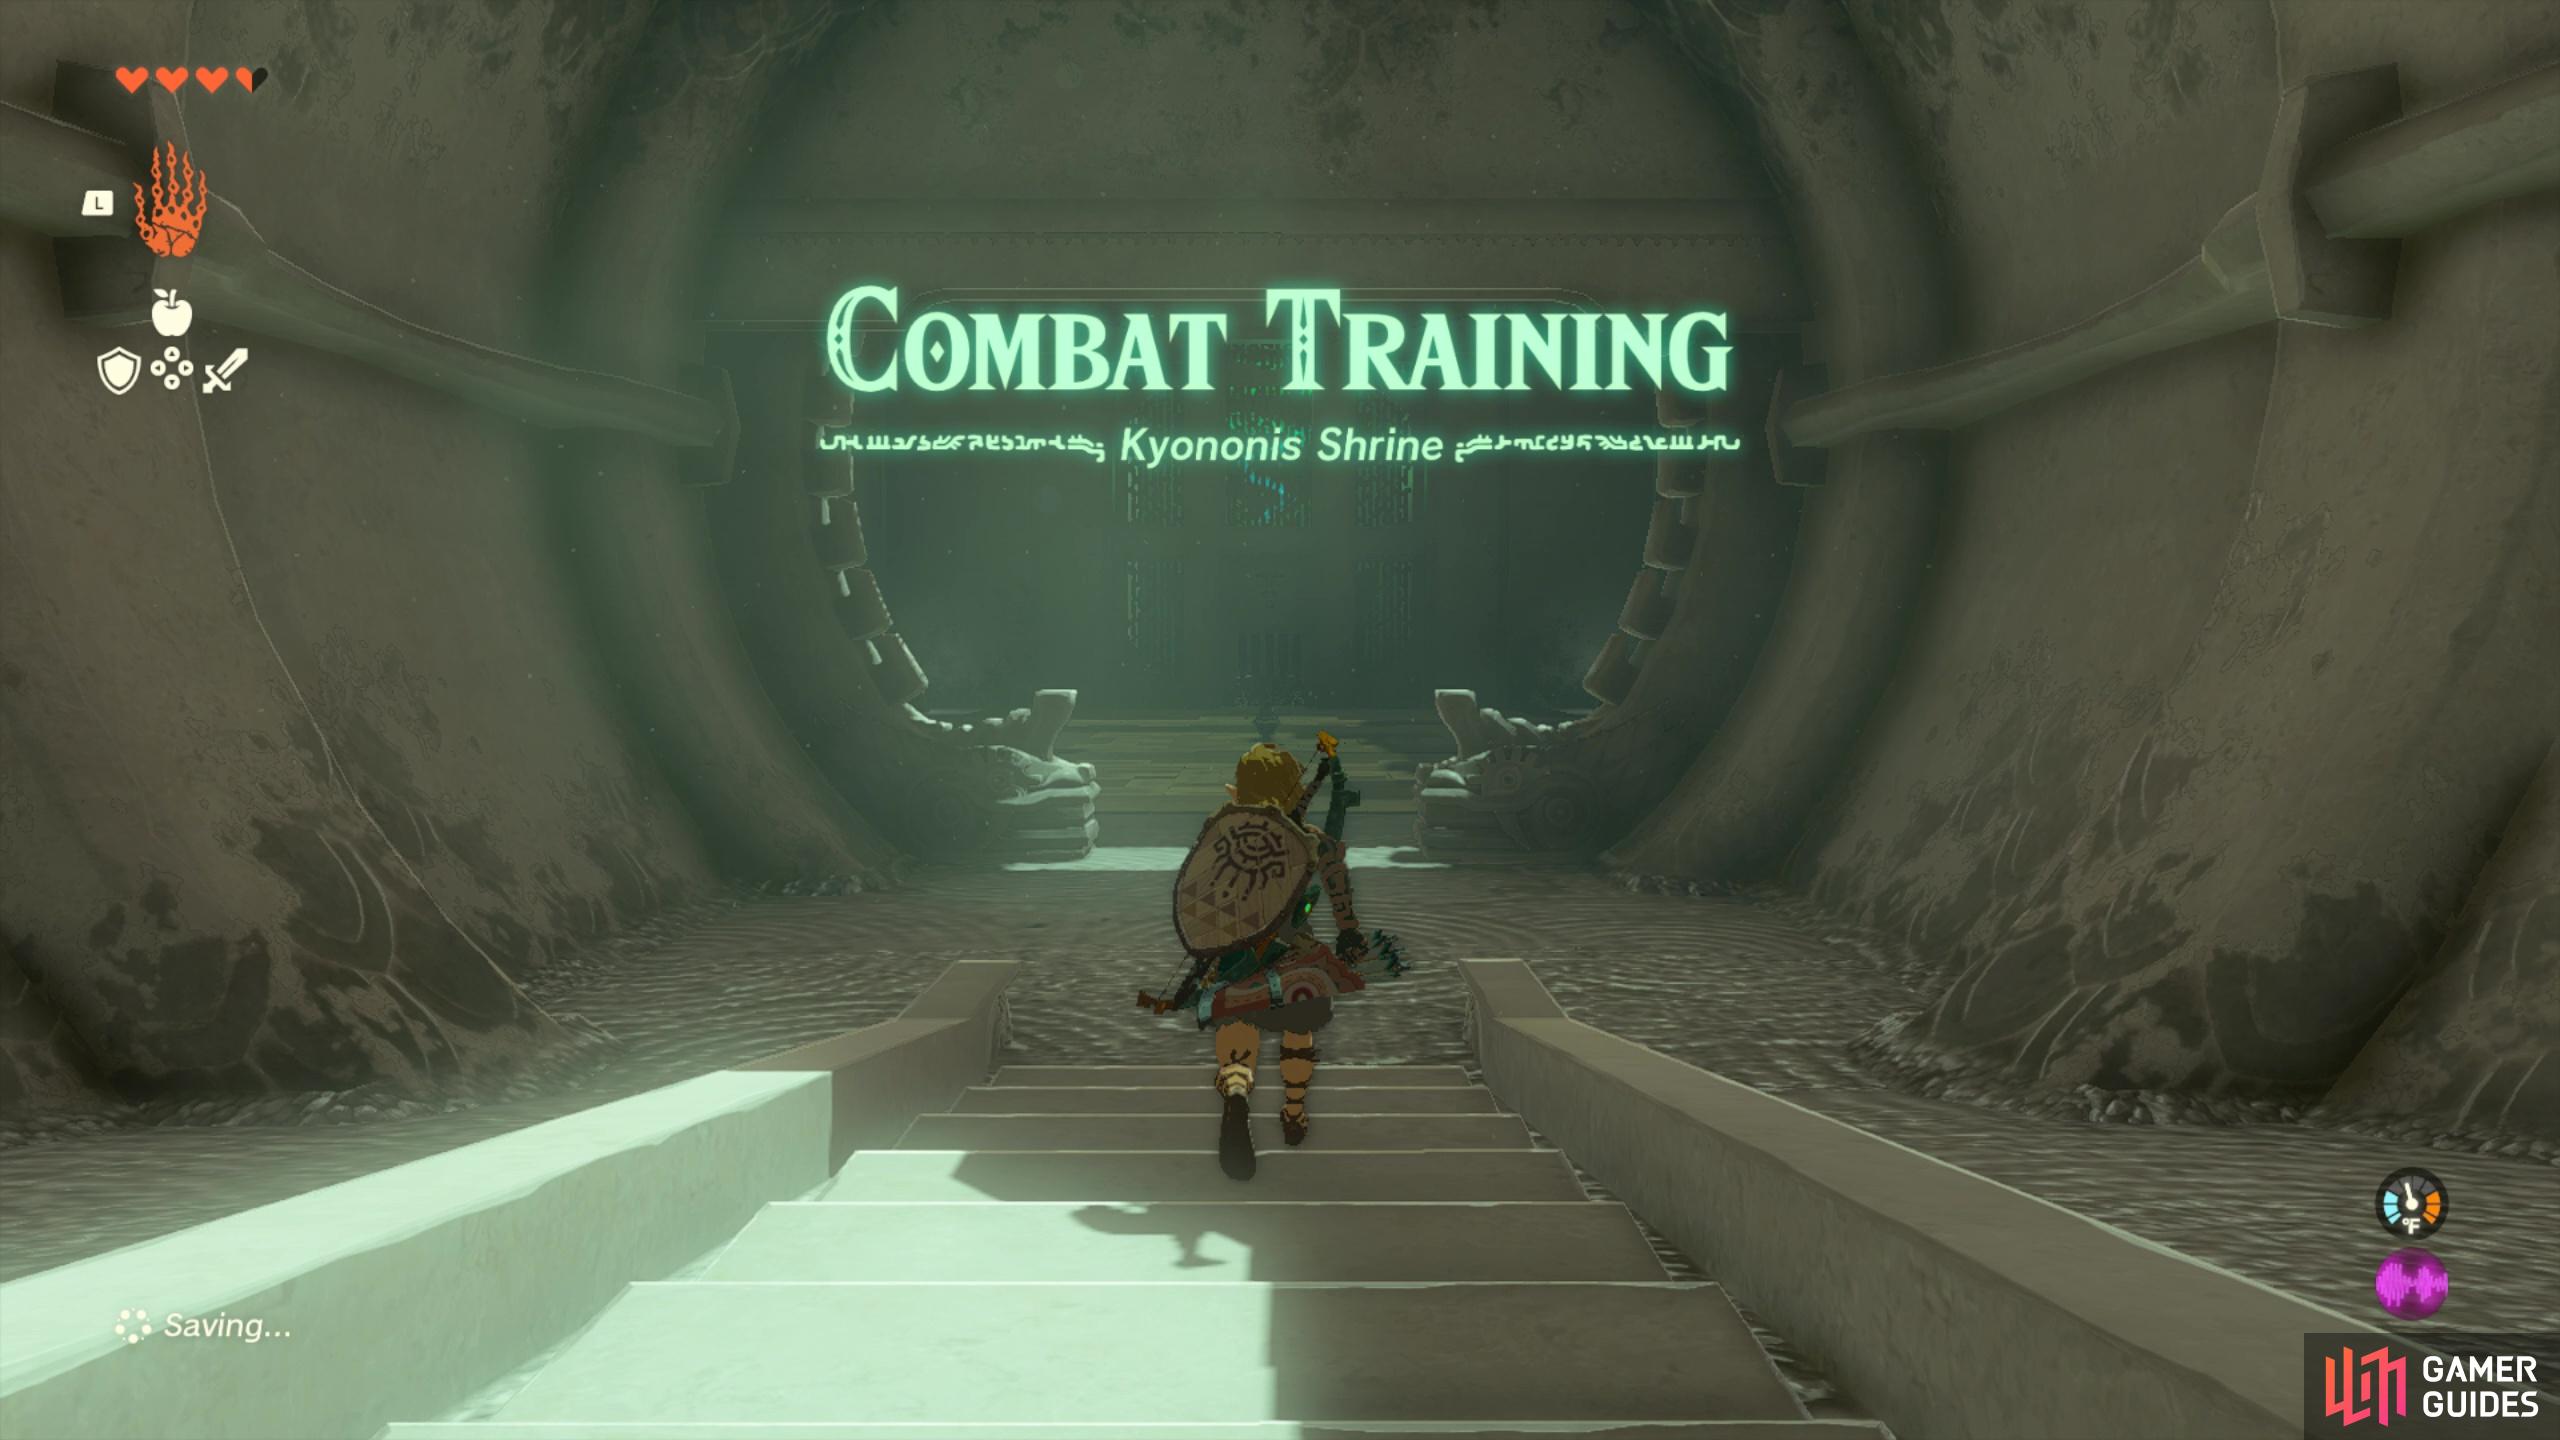 It’s time for some combat training!